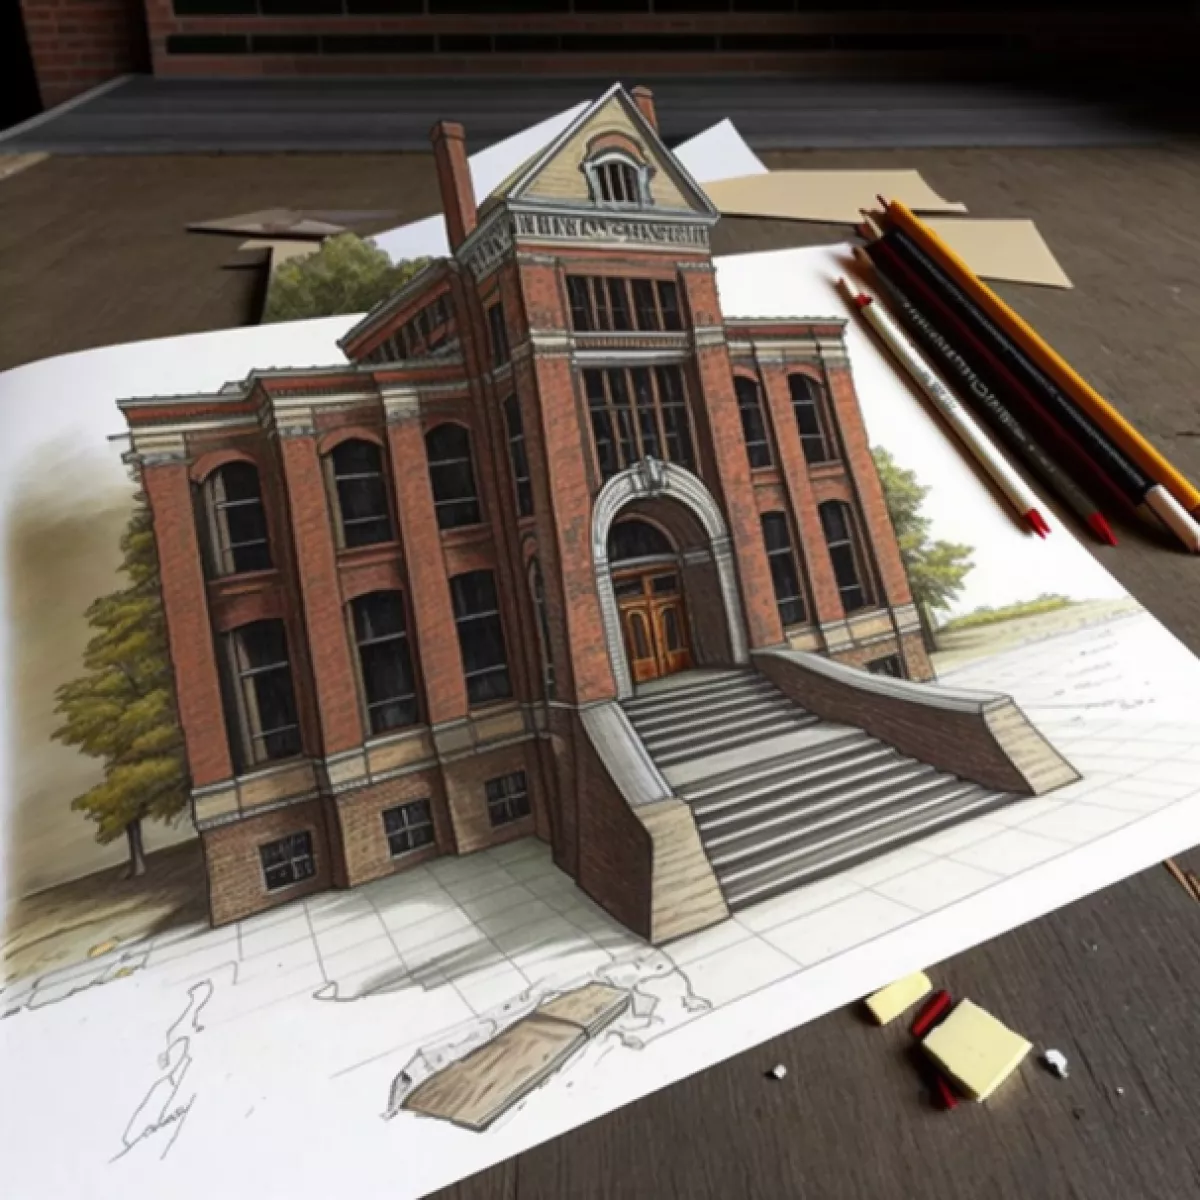 405 3 D drawing of an abandoned high school 38df06c7 e930 41eb a09d 2ac47bf35f00